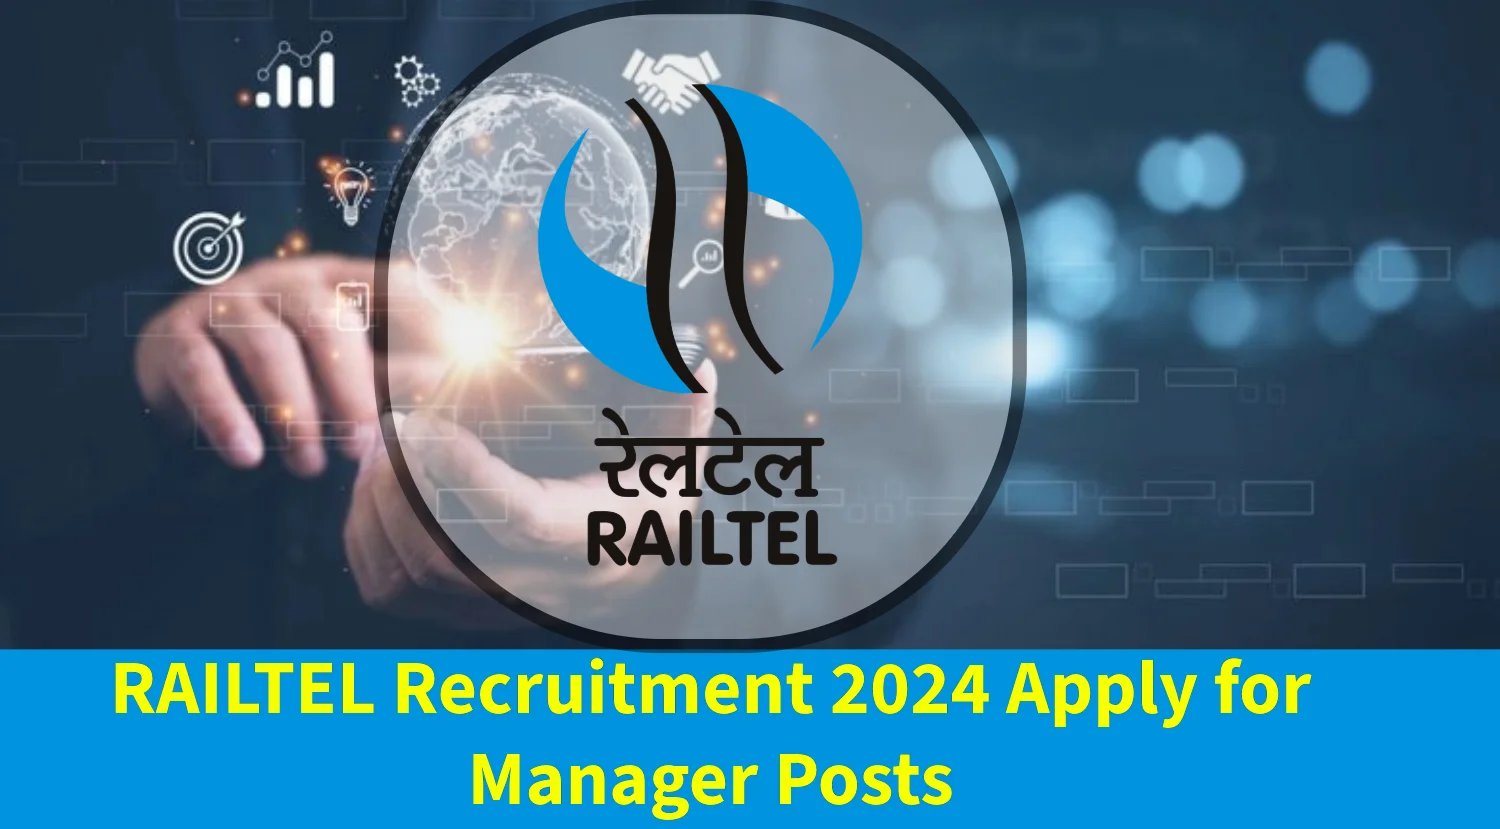 RAILTEL Recruitment 2024 Apply for Manager Posts